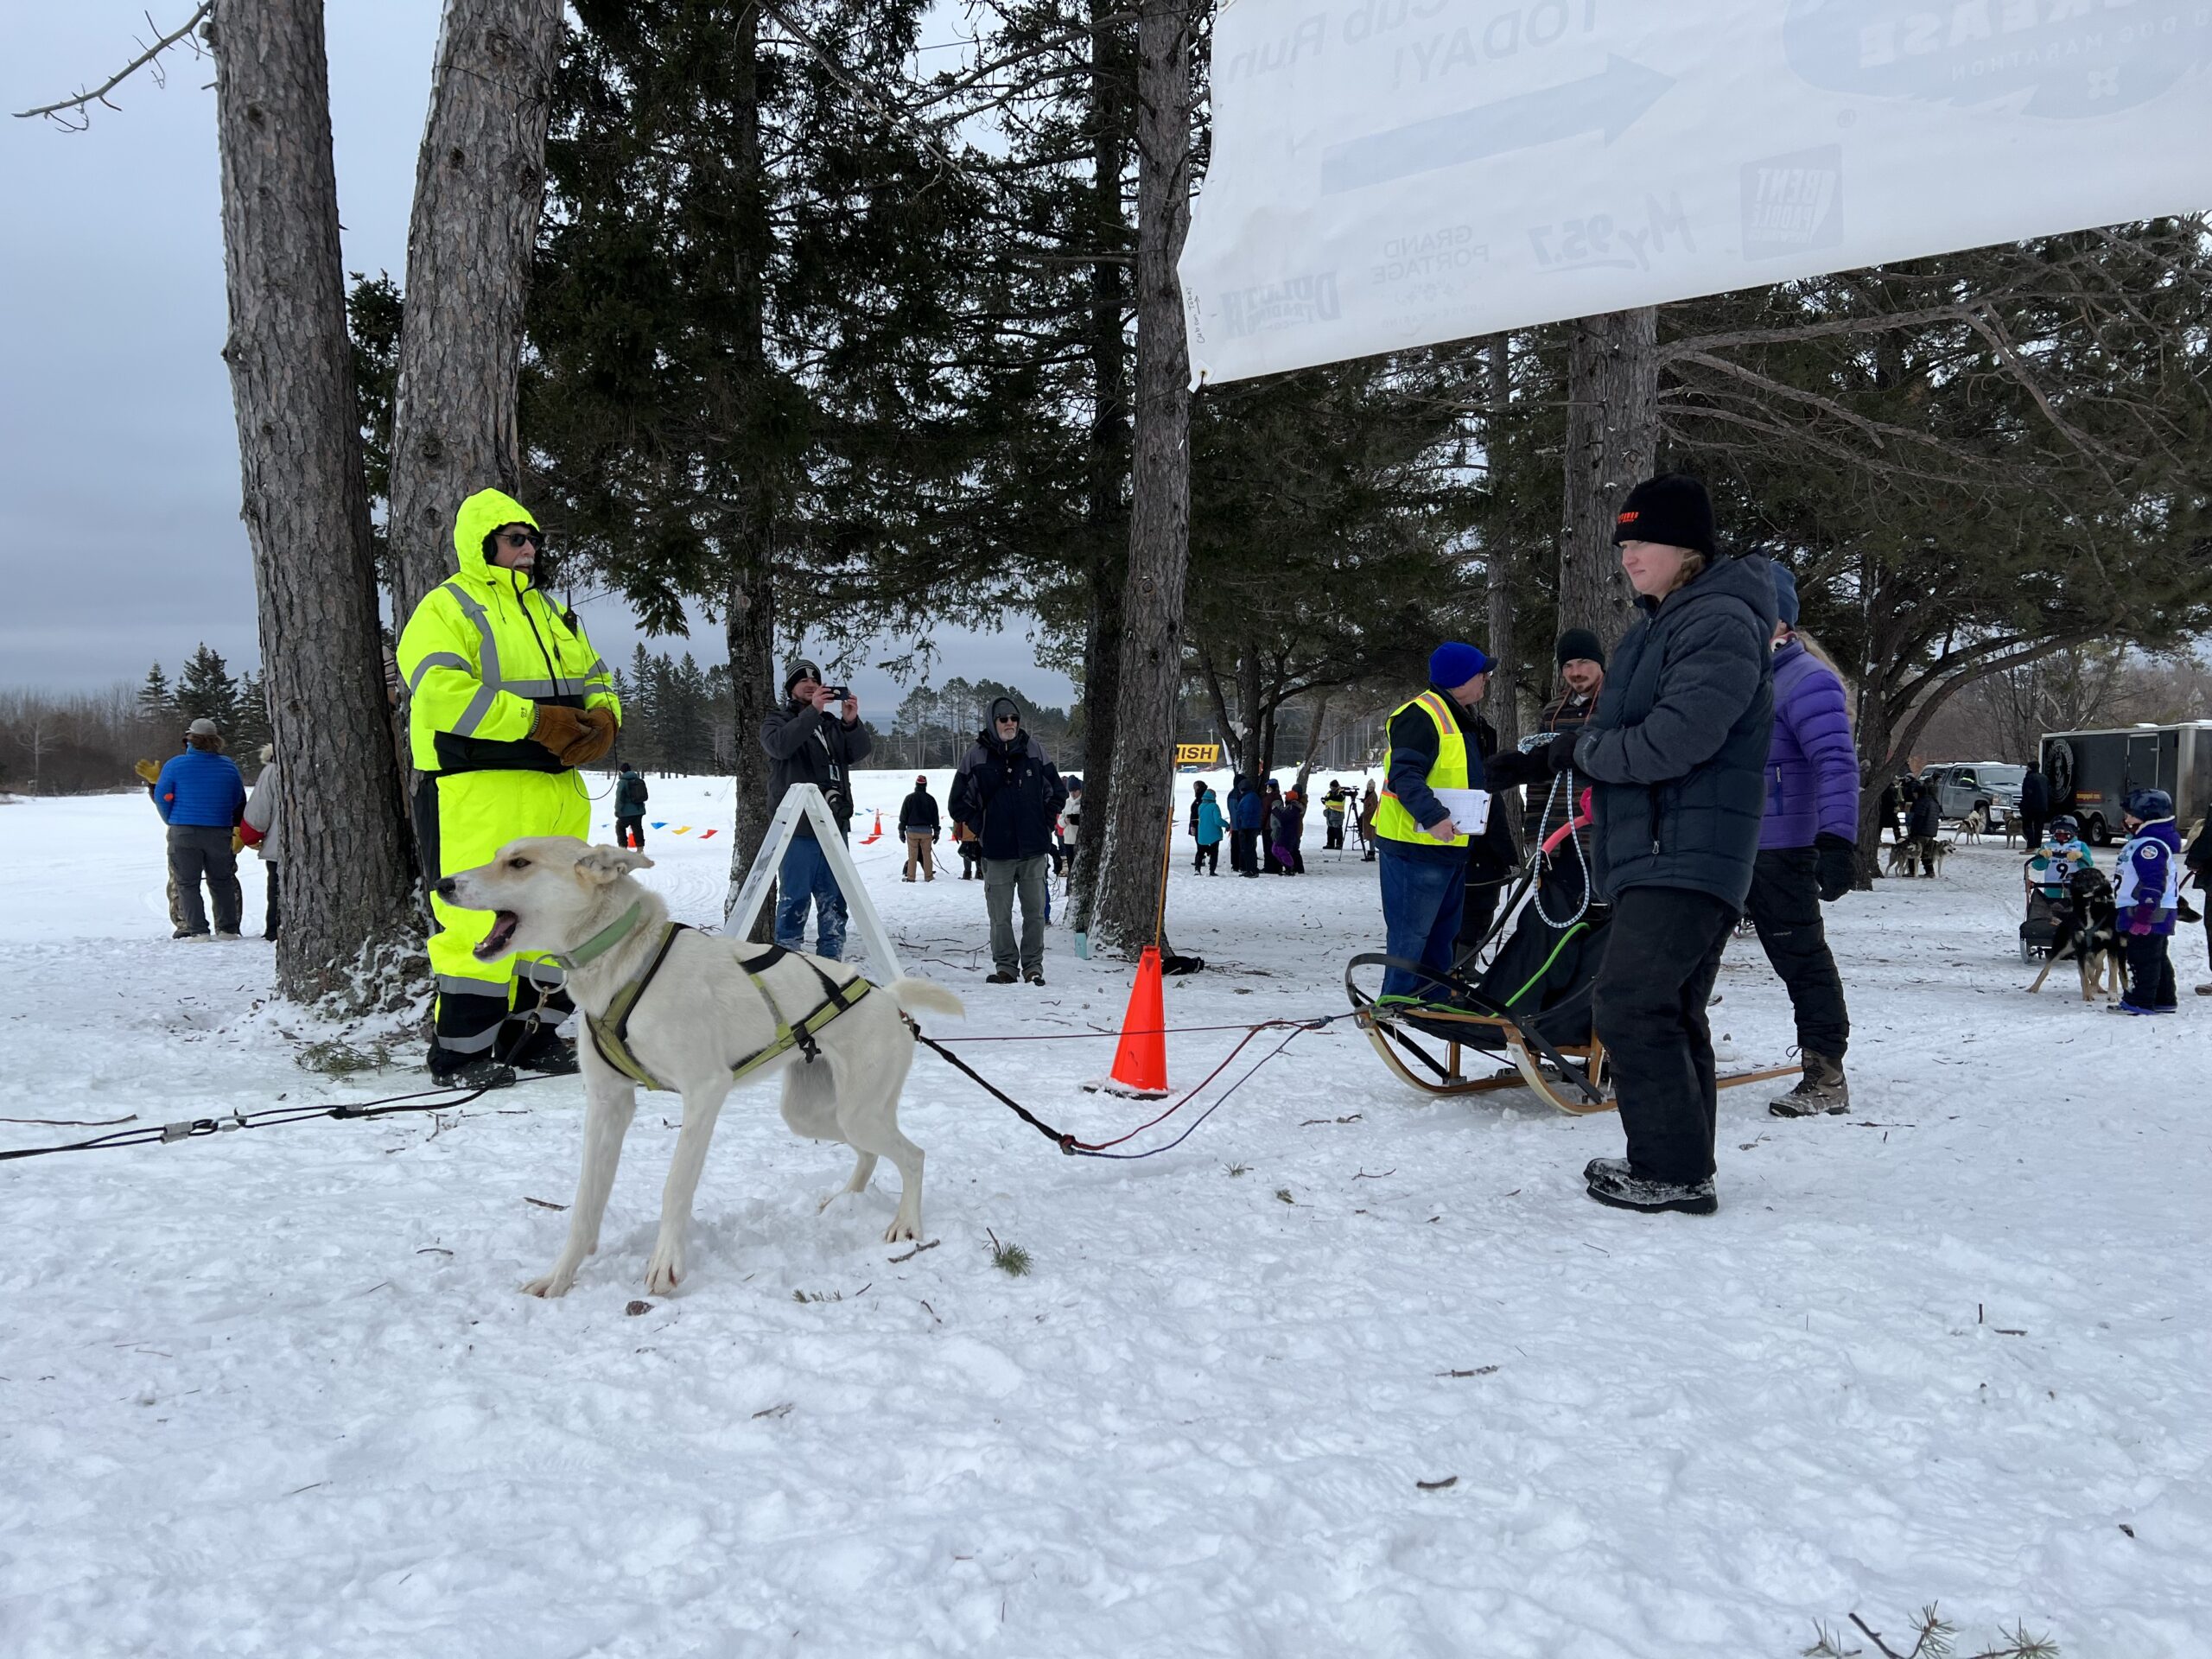 White dog appears anxious to get going at start of the Beargrease Cub Run Sled Dog race.